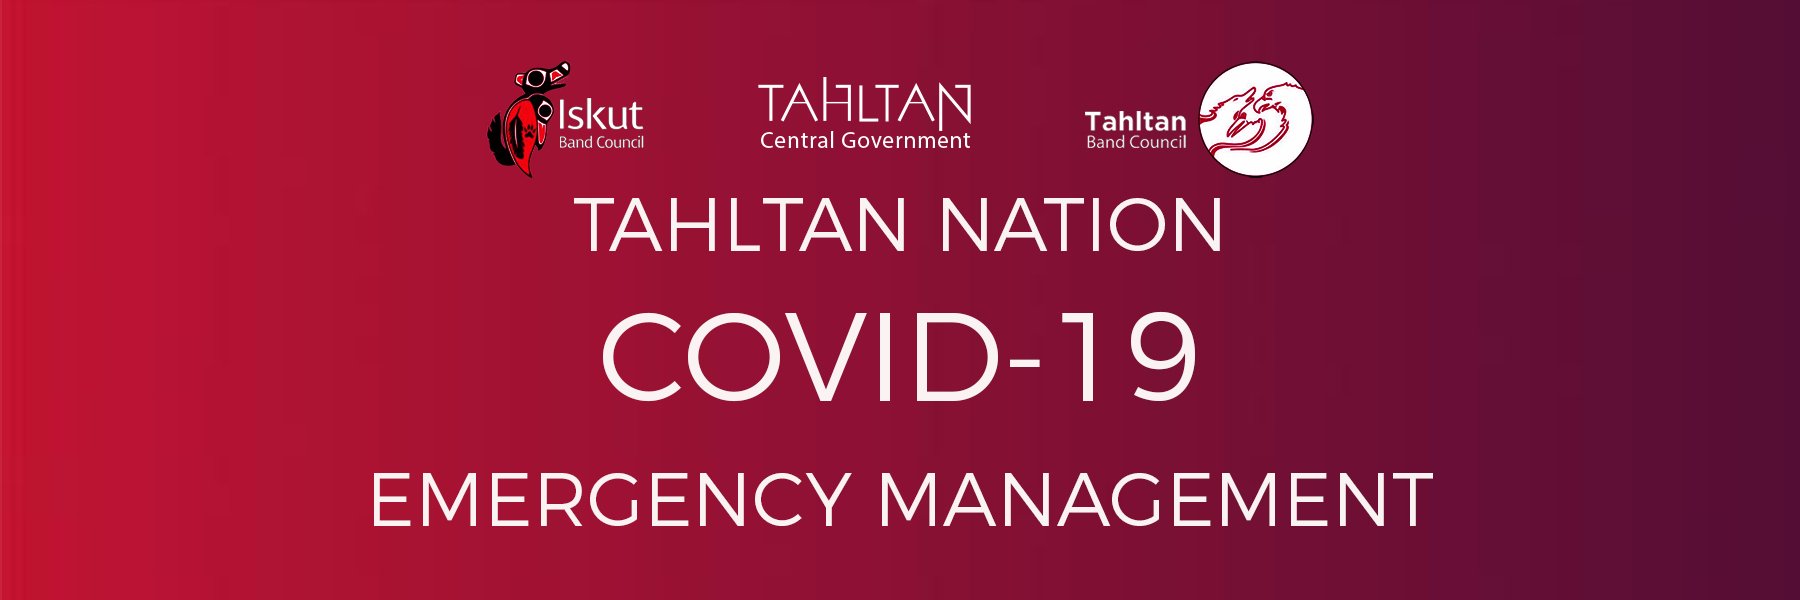 HUNTERS, WILDLIFE ENTHUSIASTS & NON-RESIDENTS: DO NOT TRAVEL TO TAHLTAN TERRITORY DURING COVID-19